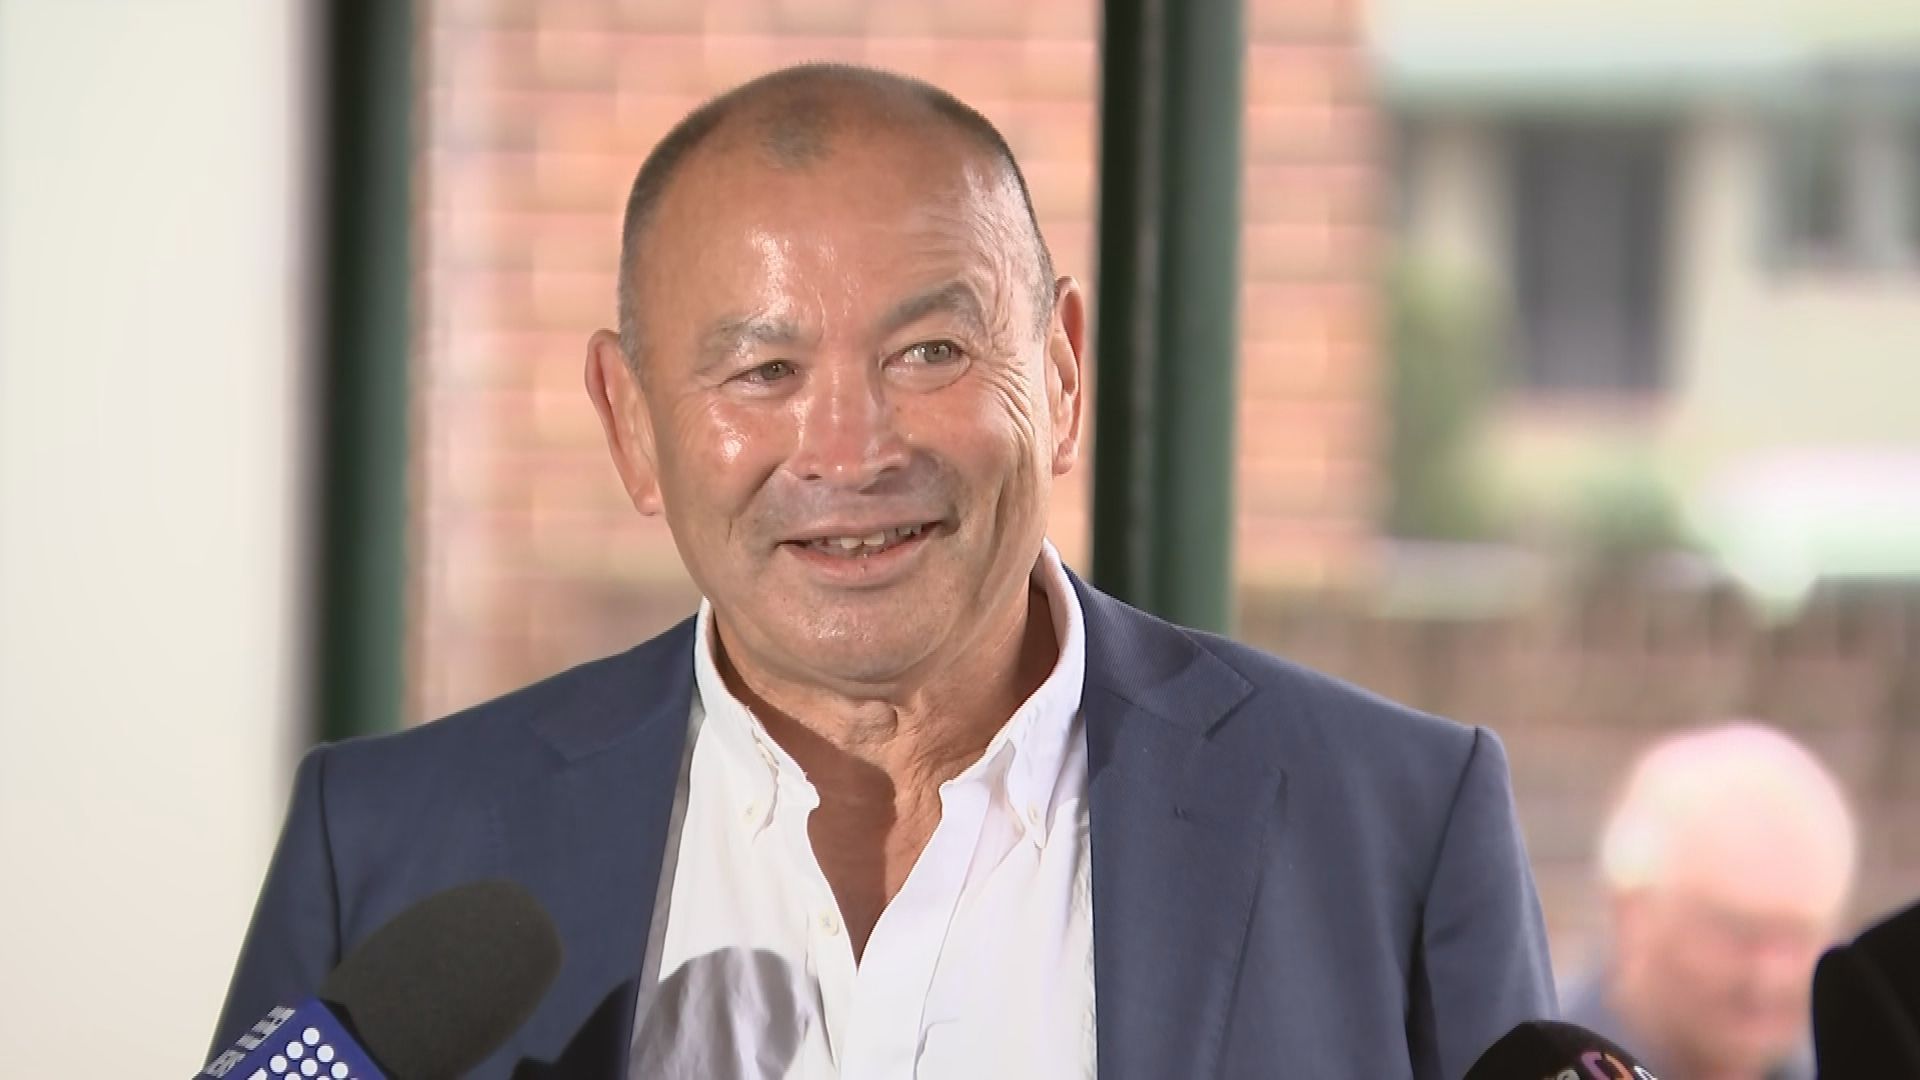 Eddie Jones cops grilling over Japan reports, reveals Wallabies future with two words